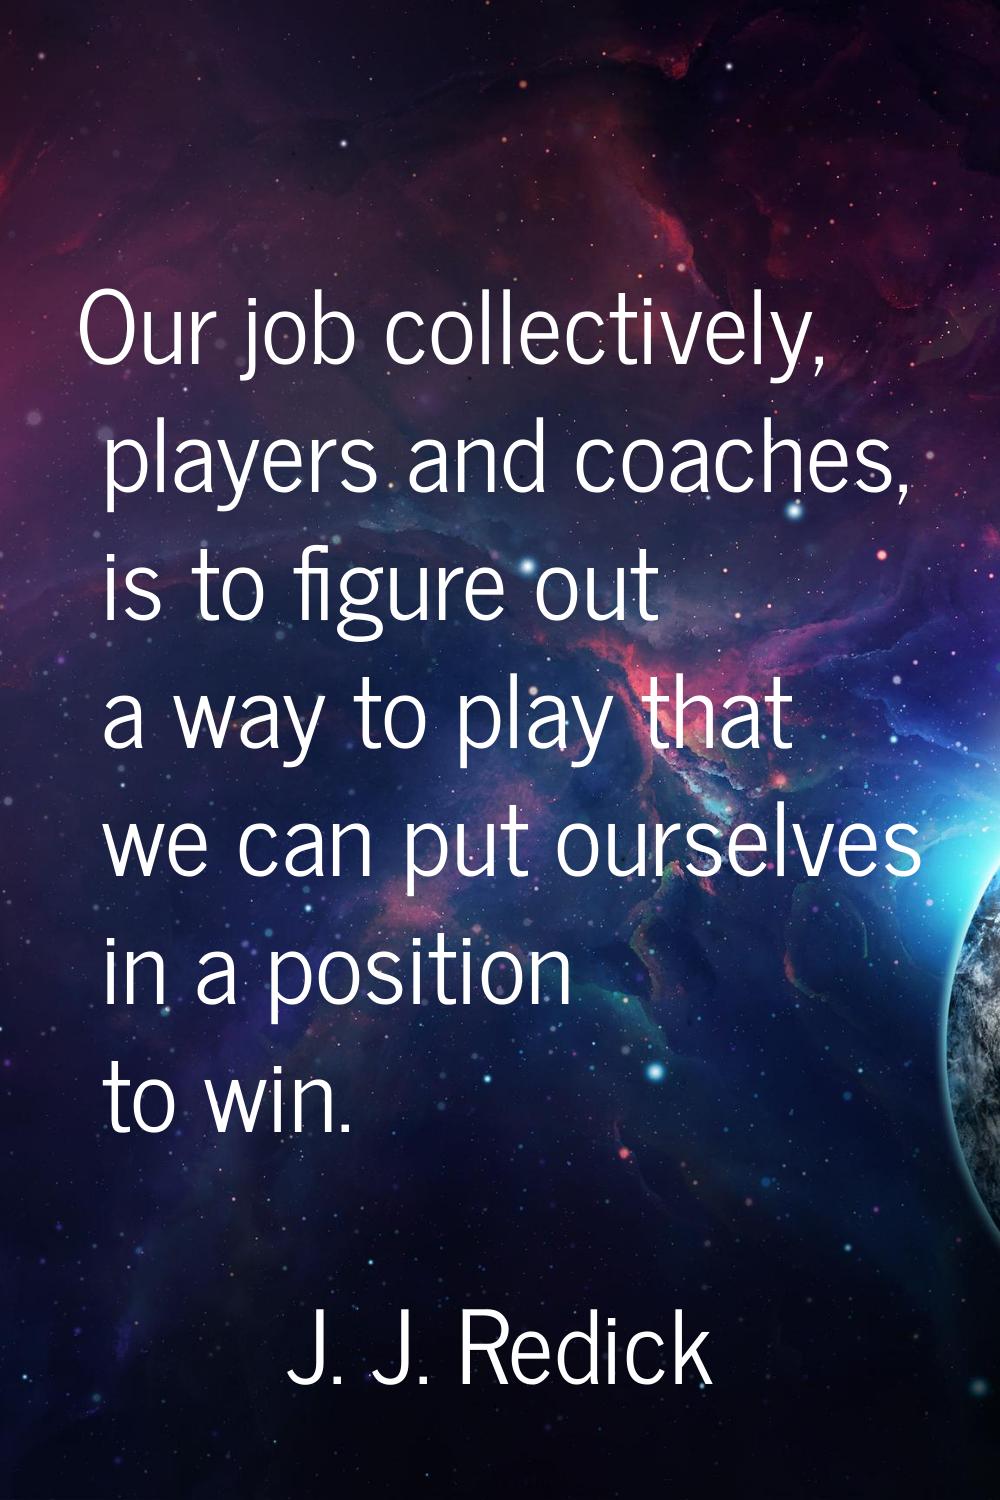 Our job collectively, players and coaches, is to figure out a way to play that we can put ourselves